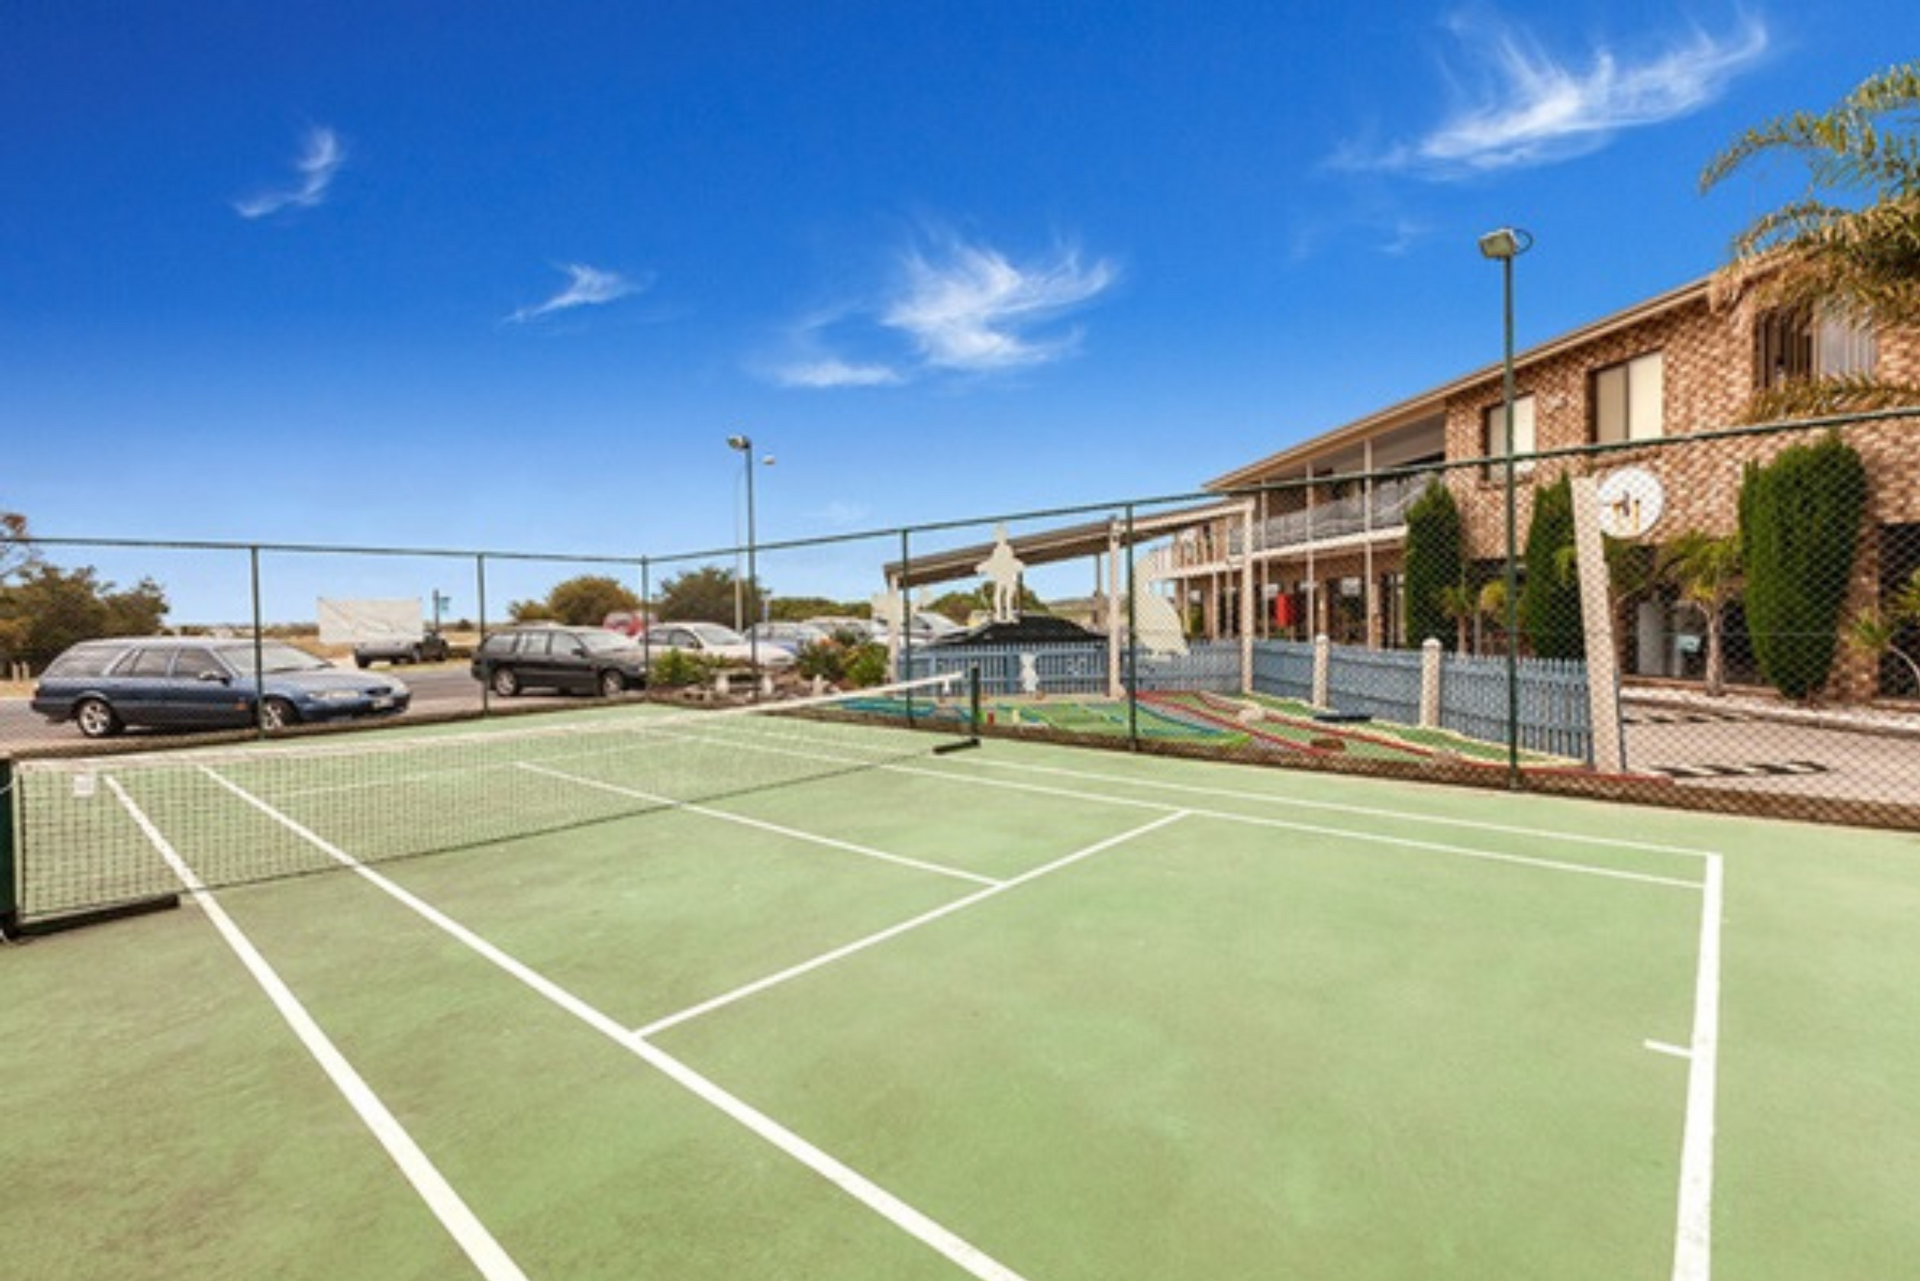 A tennis court with a basketball hoop in front of a building.